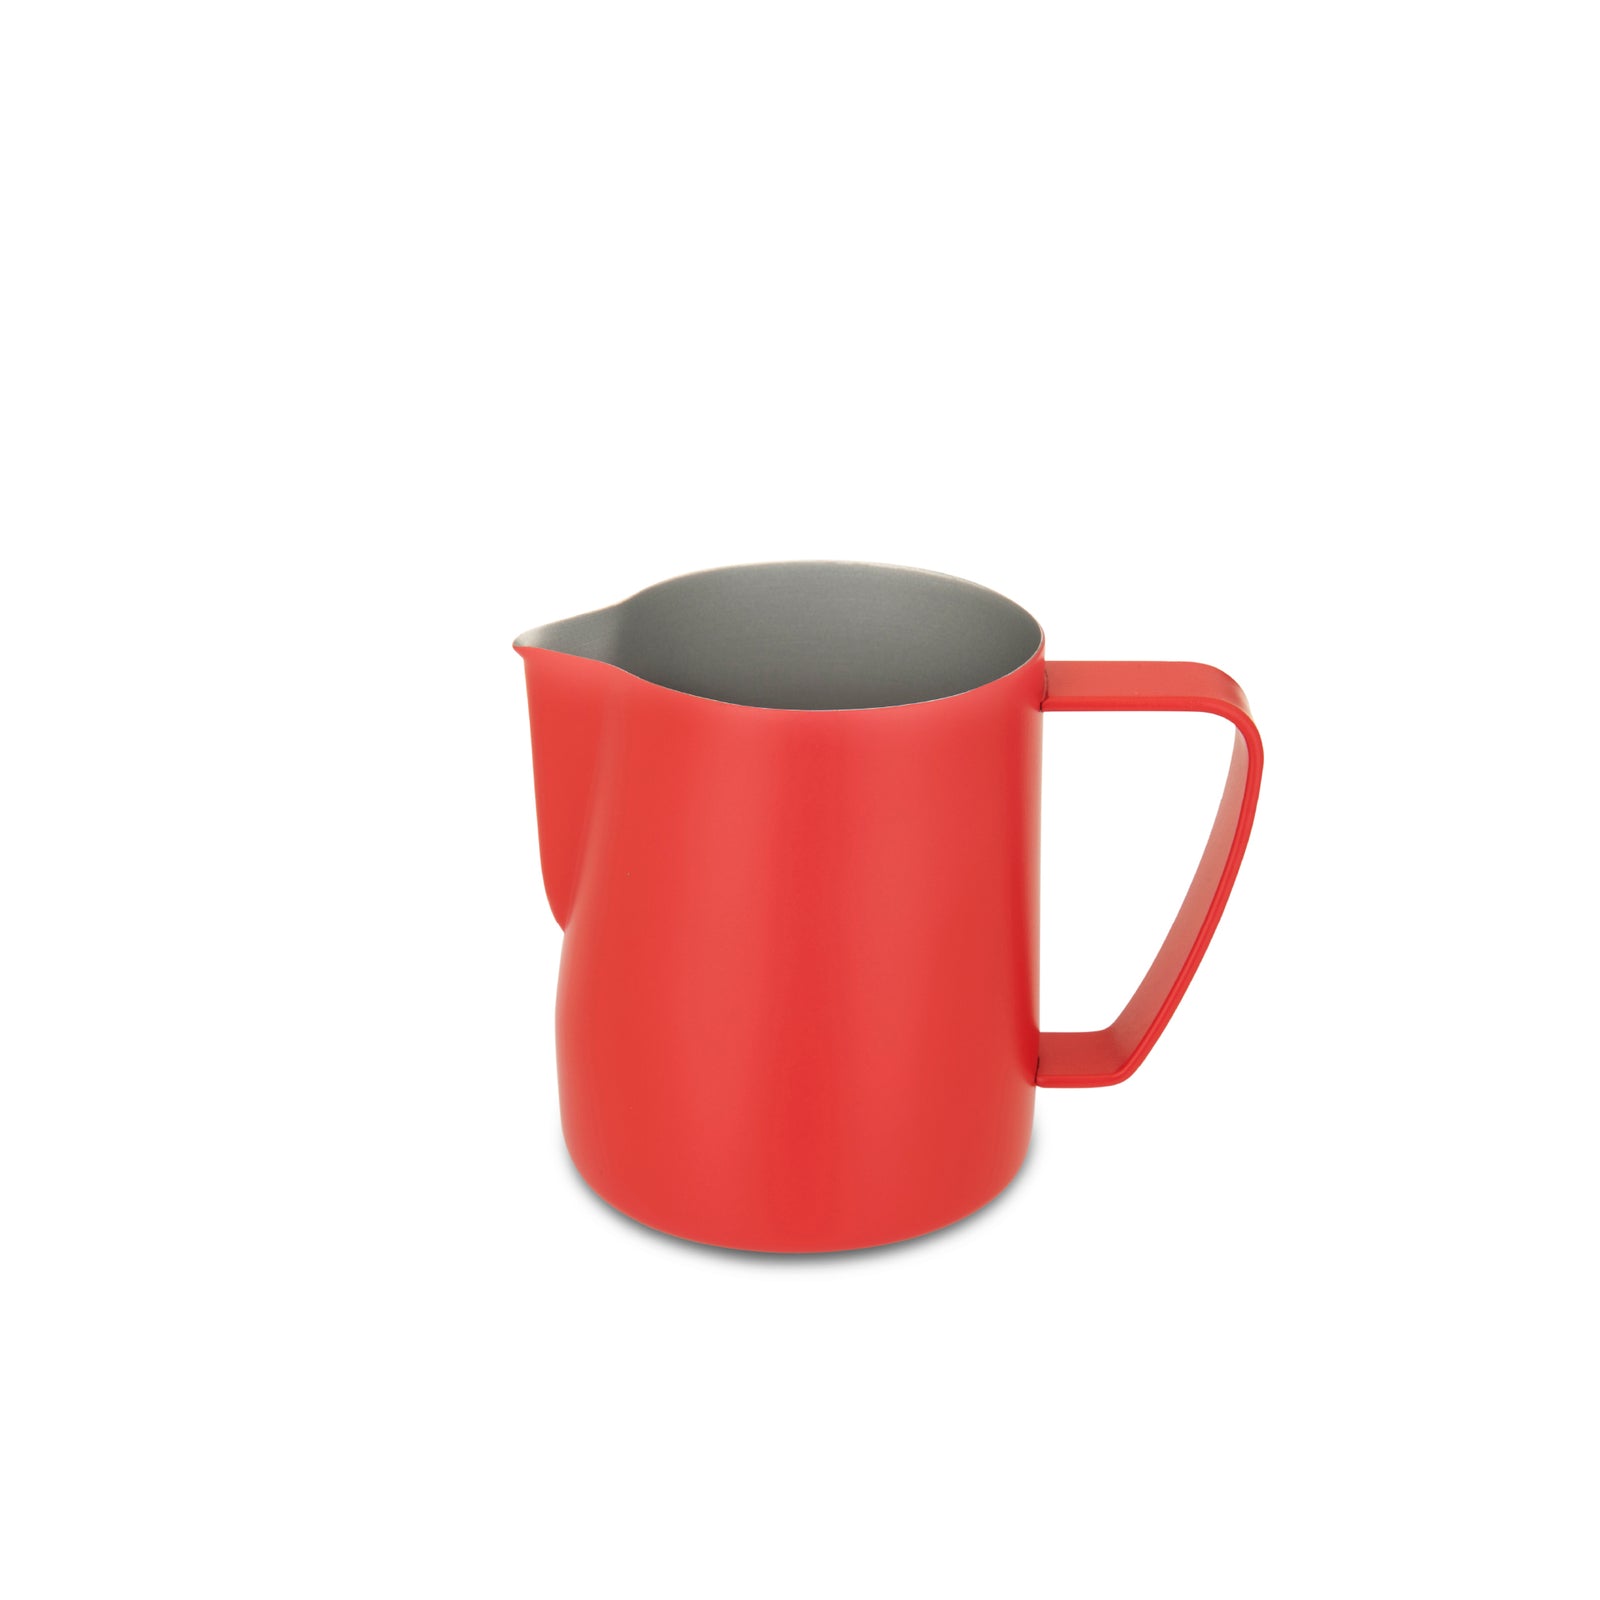 https://cdn.shopify.com/s/files/1/0293/4380/9620/products/espressoworks-milk-frothing-jug-stainless-steel-matte-red-three-hundred-fifty-ml-02_1600x.jpg?v=1604995466